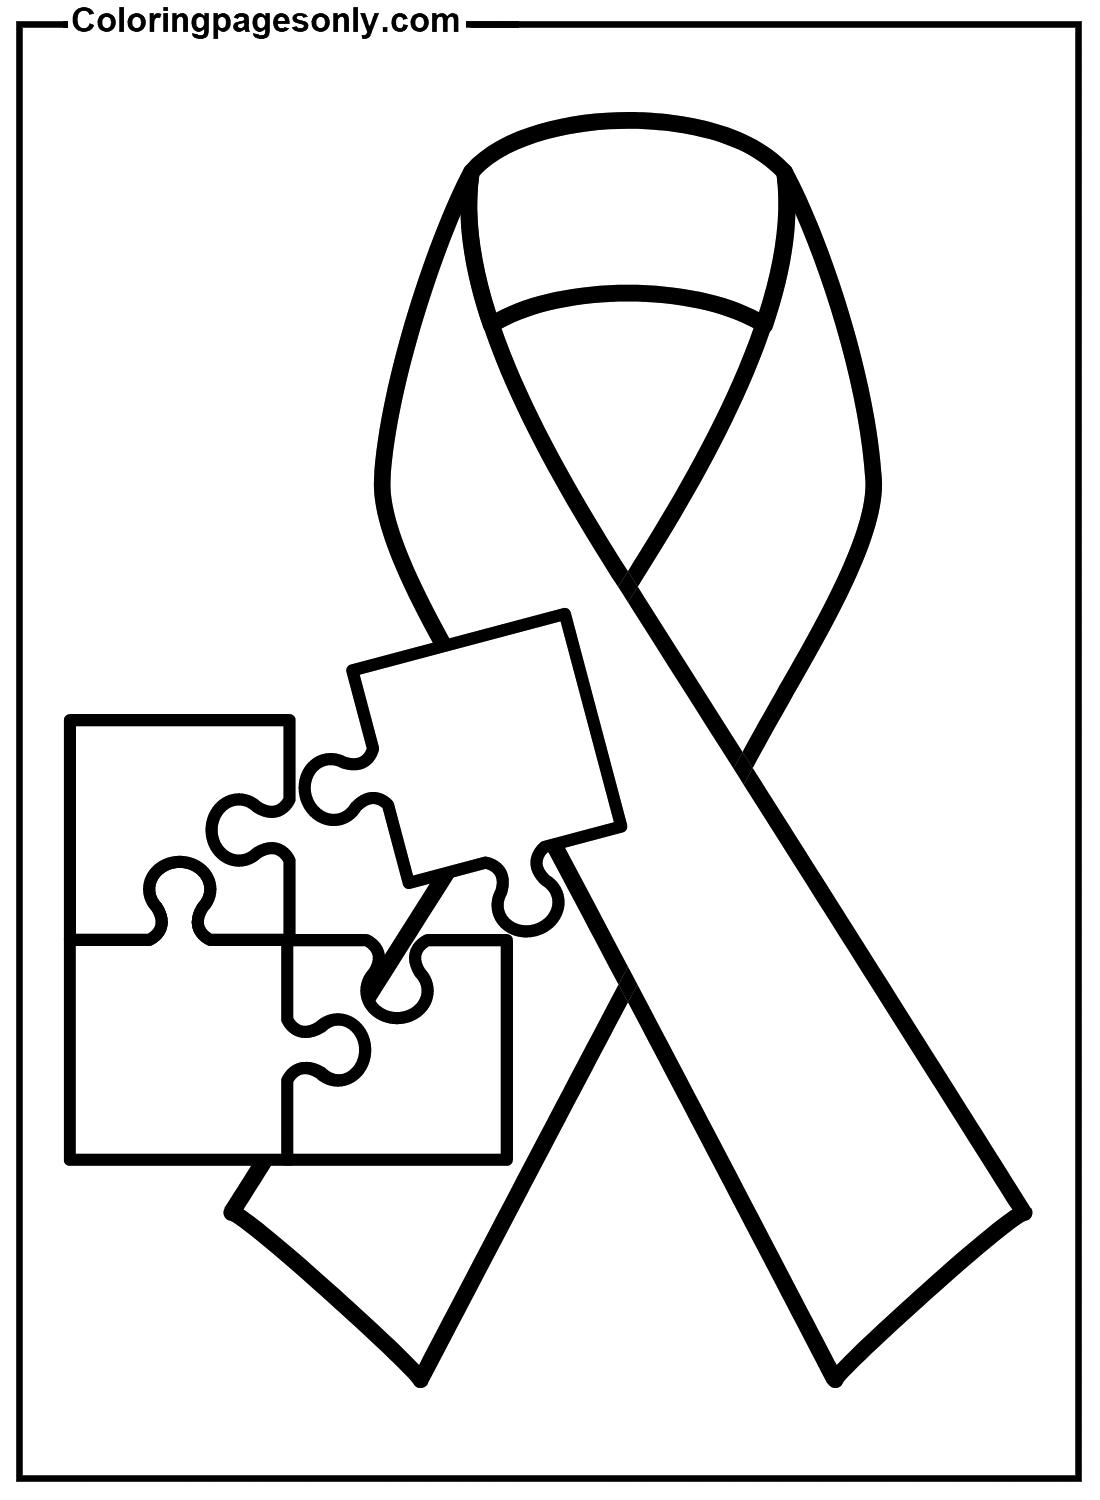 Autism Awareness Images Coloring Pages